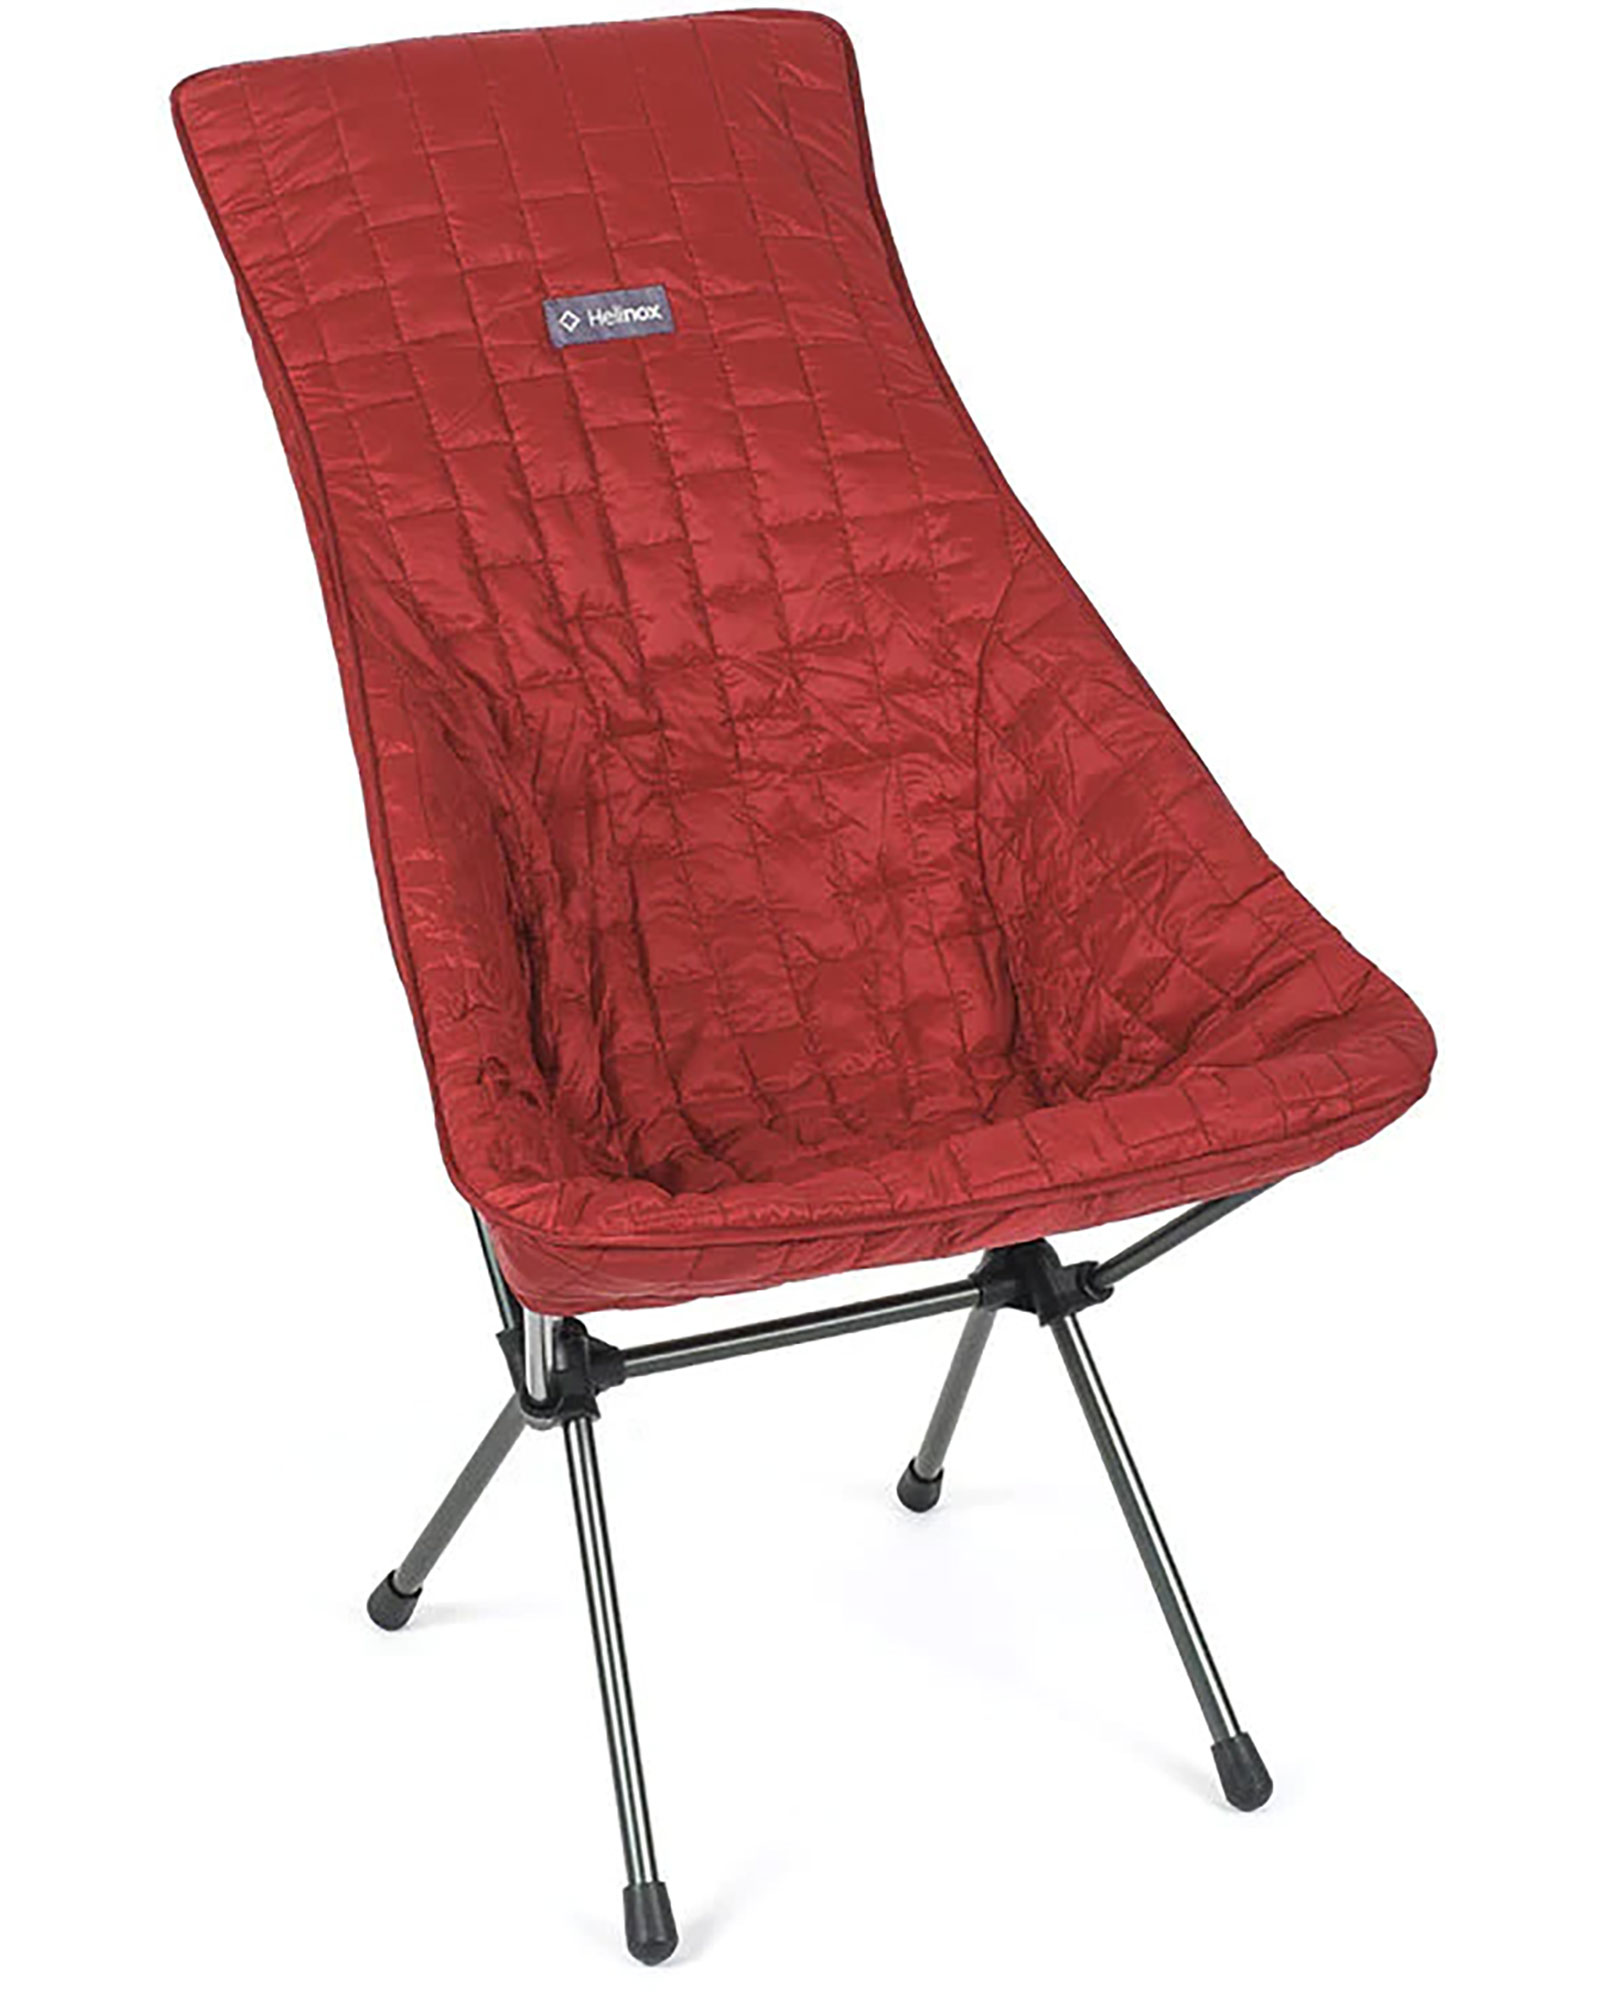 Helinox Seat Warmer for Sunset Chair - Scarlet/Iron